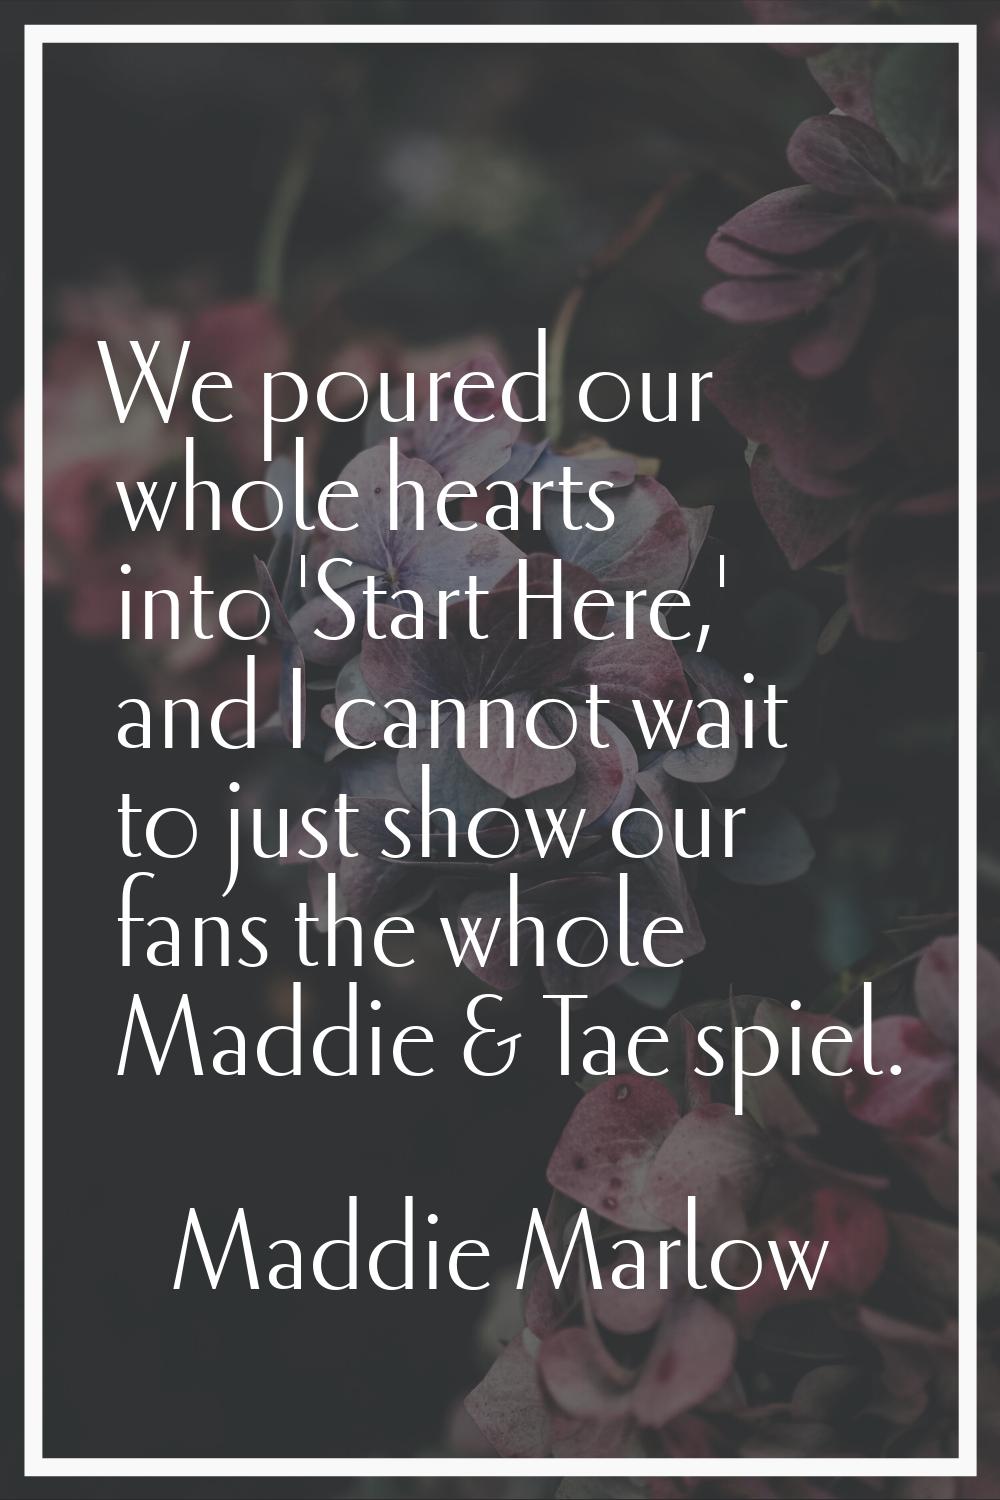 We poured our whole hearts into 'Start Here,' and I cannot wait to just show our fans the whole Mad